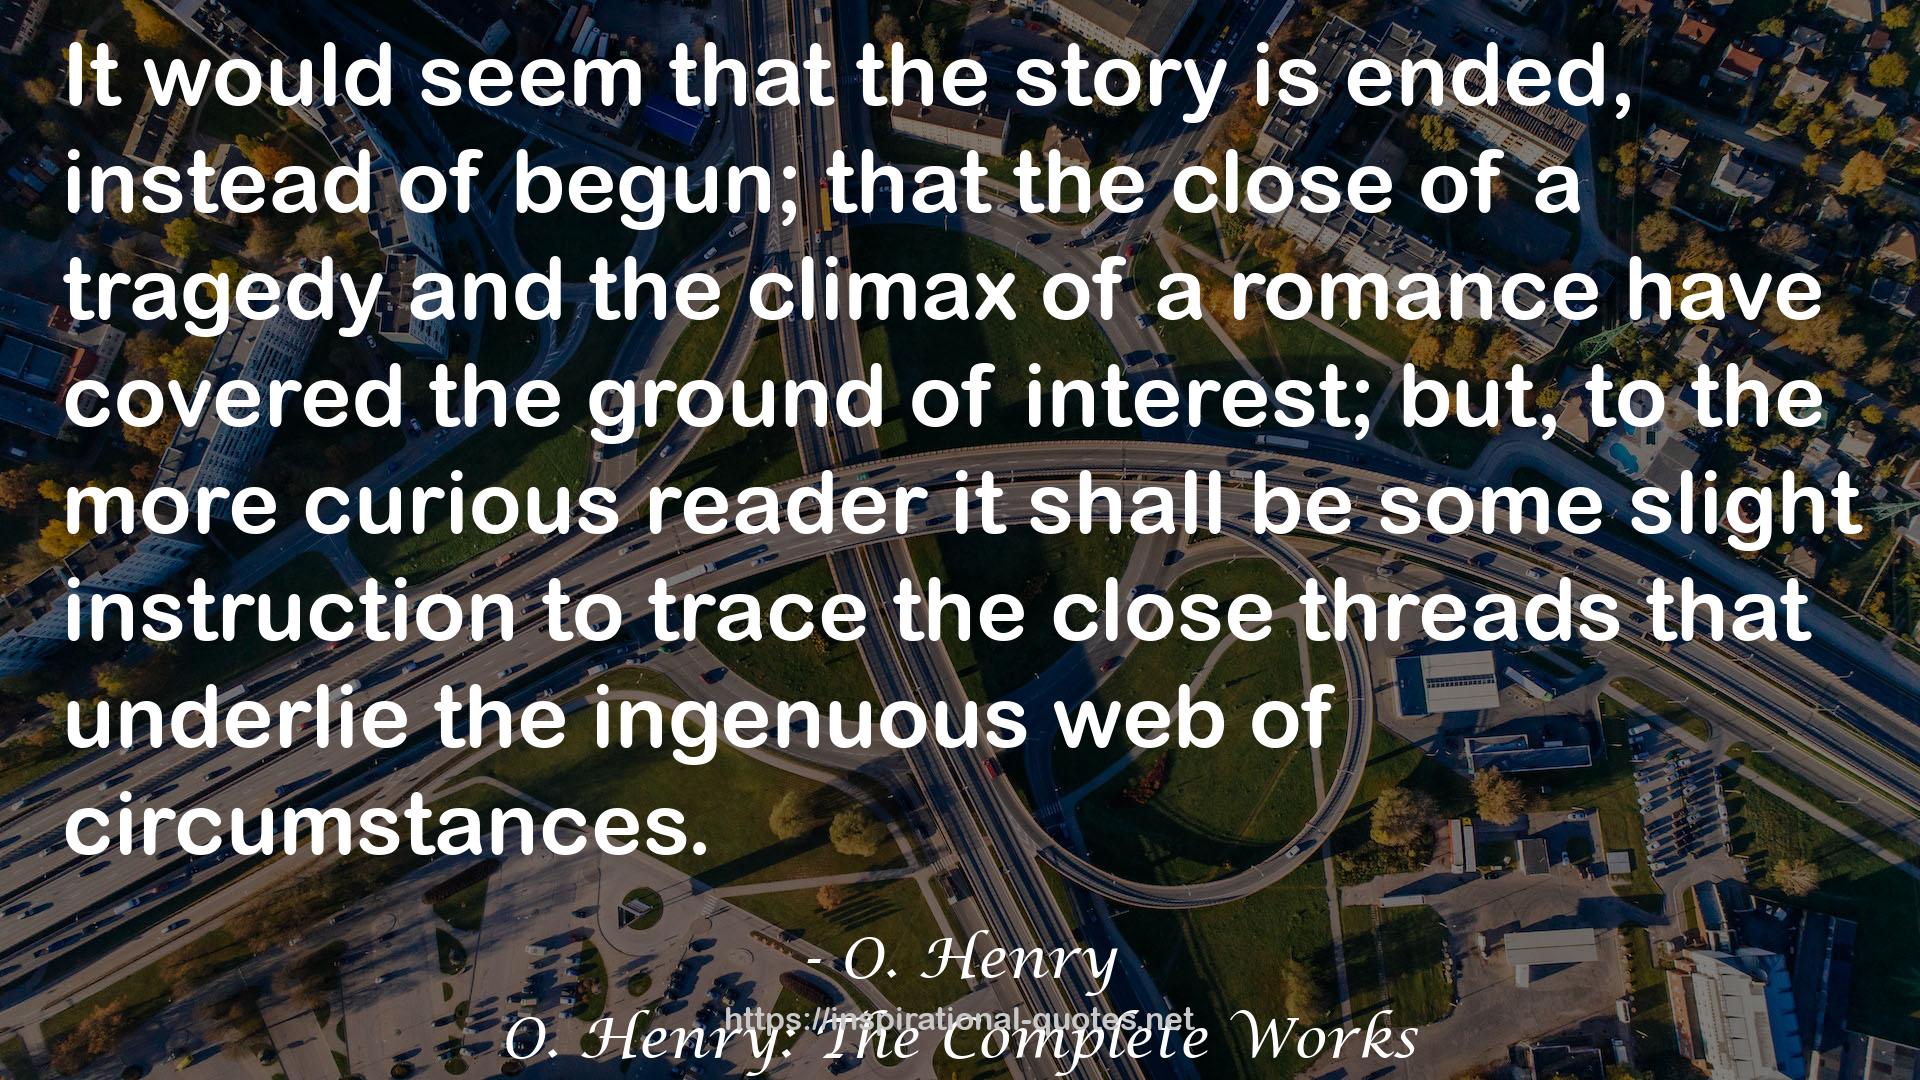 O. Henry: The Complete Works QUOTES